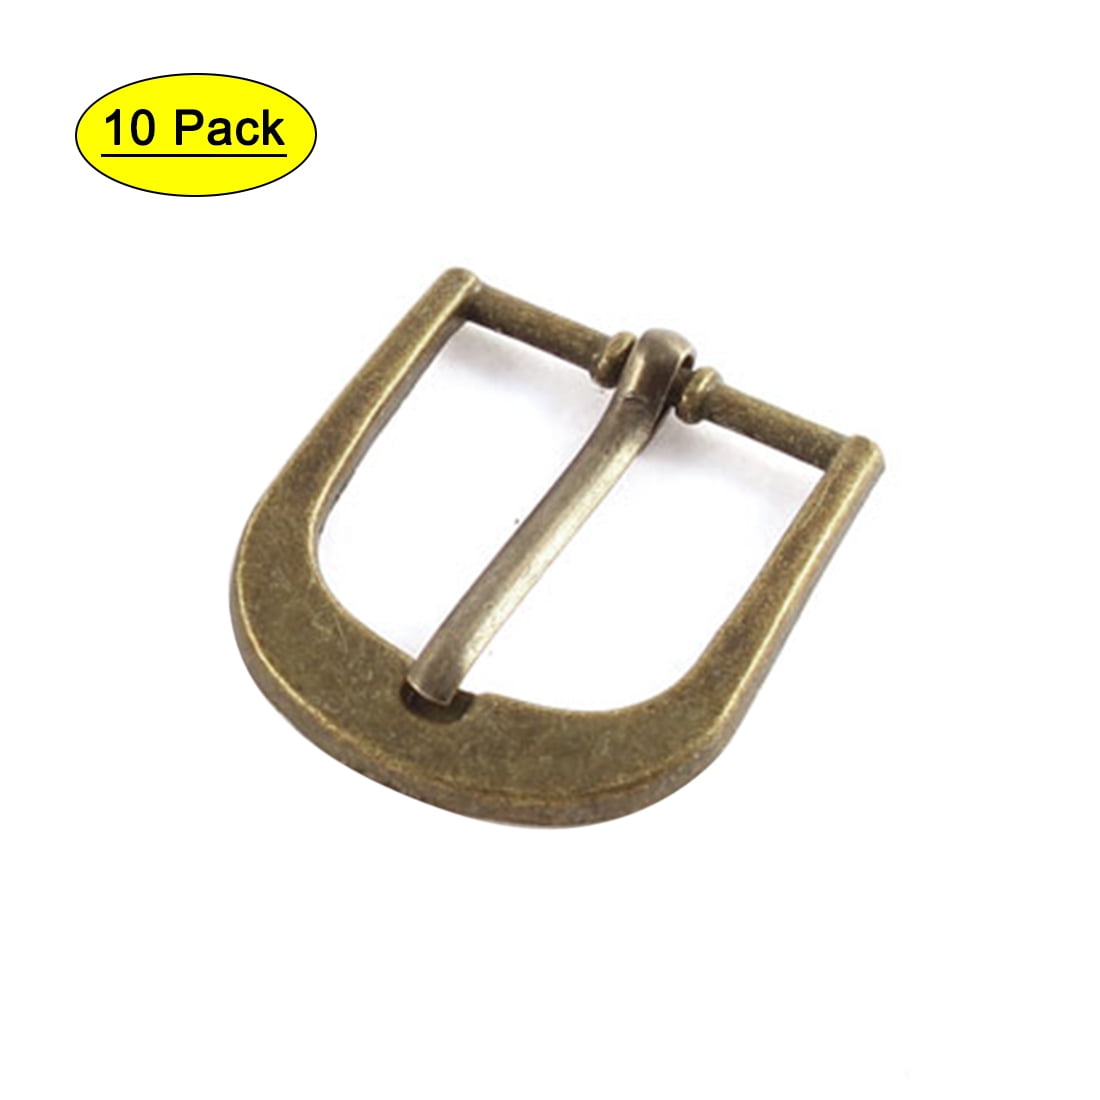 1 Set Of Overall Clips Replacement Diy Overalls Dungaree Belt